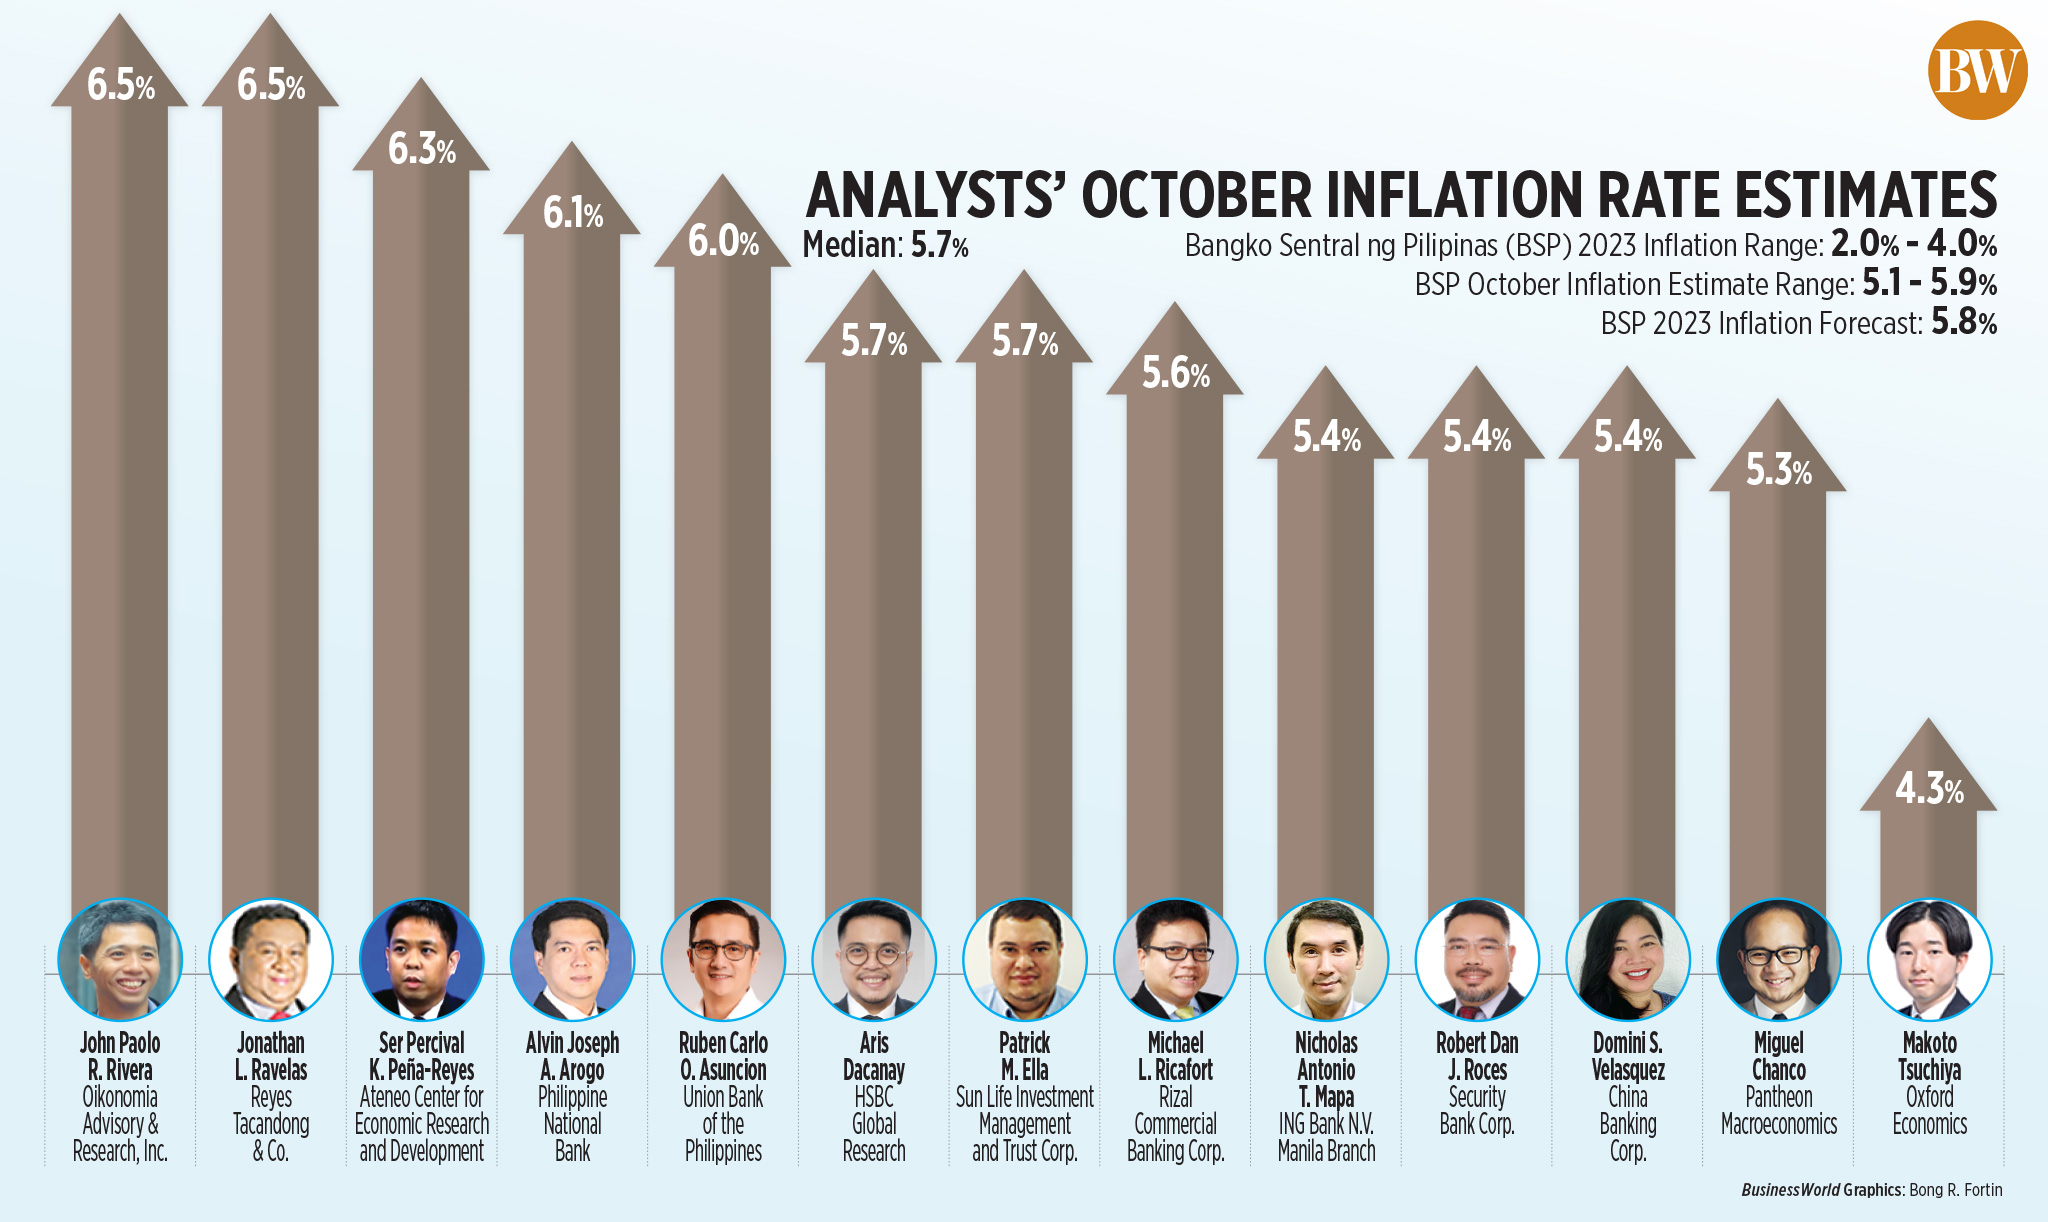 Analysts’ October inflation rate estimates